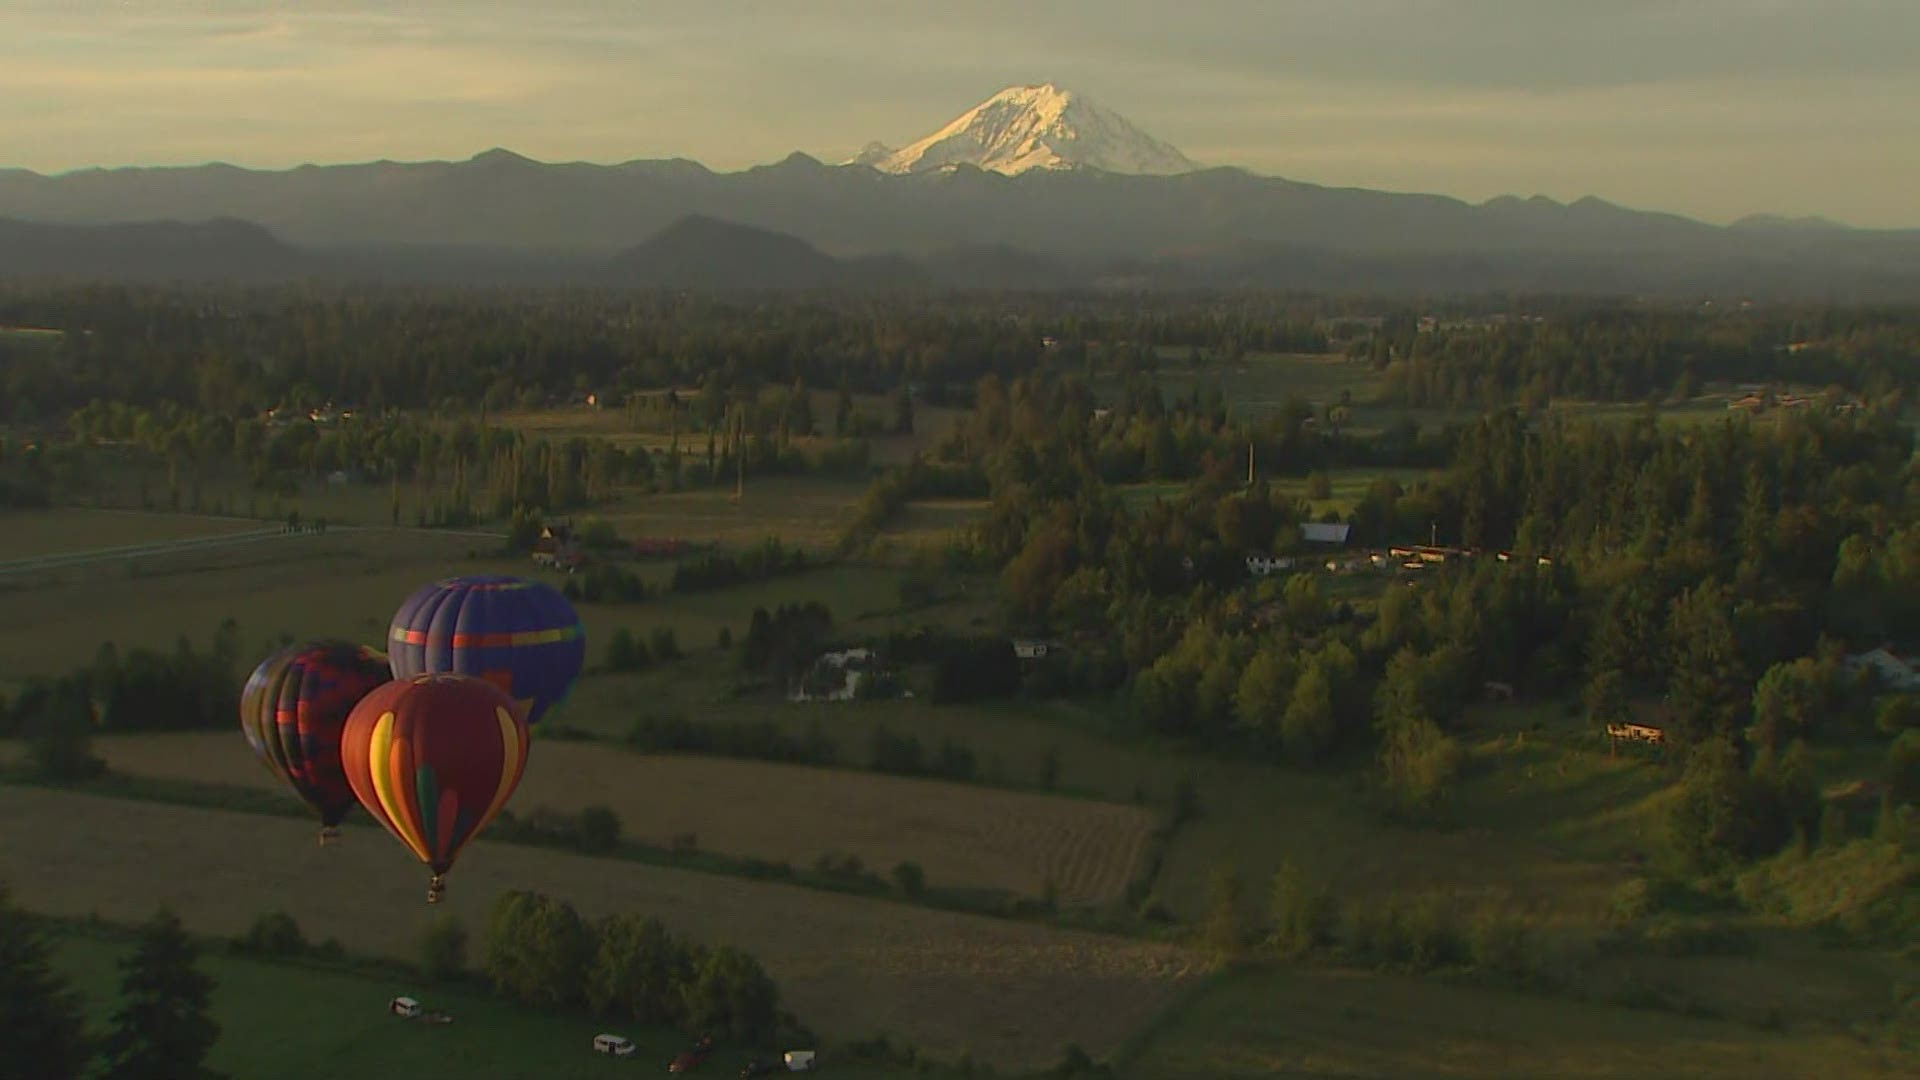 Western Washington’s heat wave is causing some businesses to close, including Seattle Ballooning.